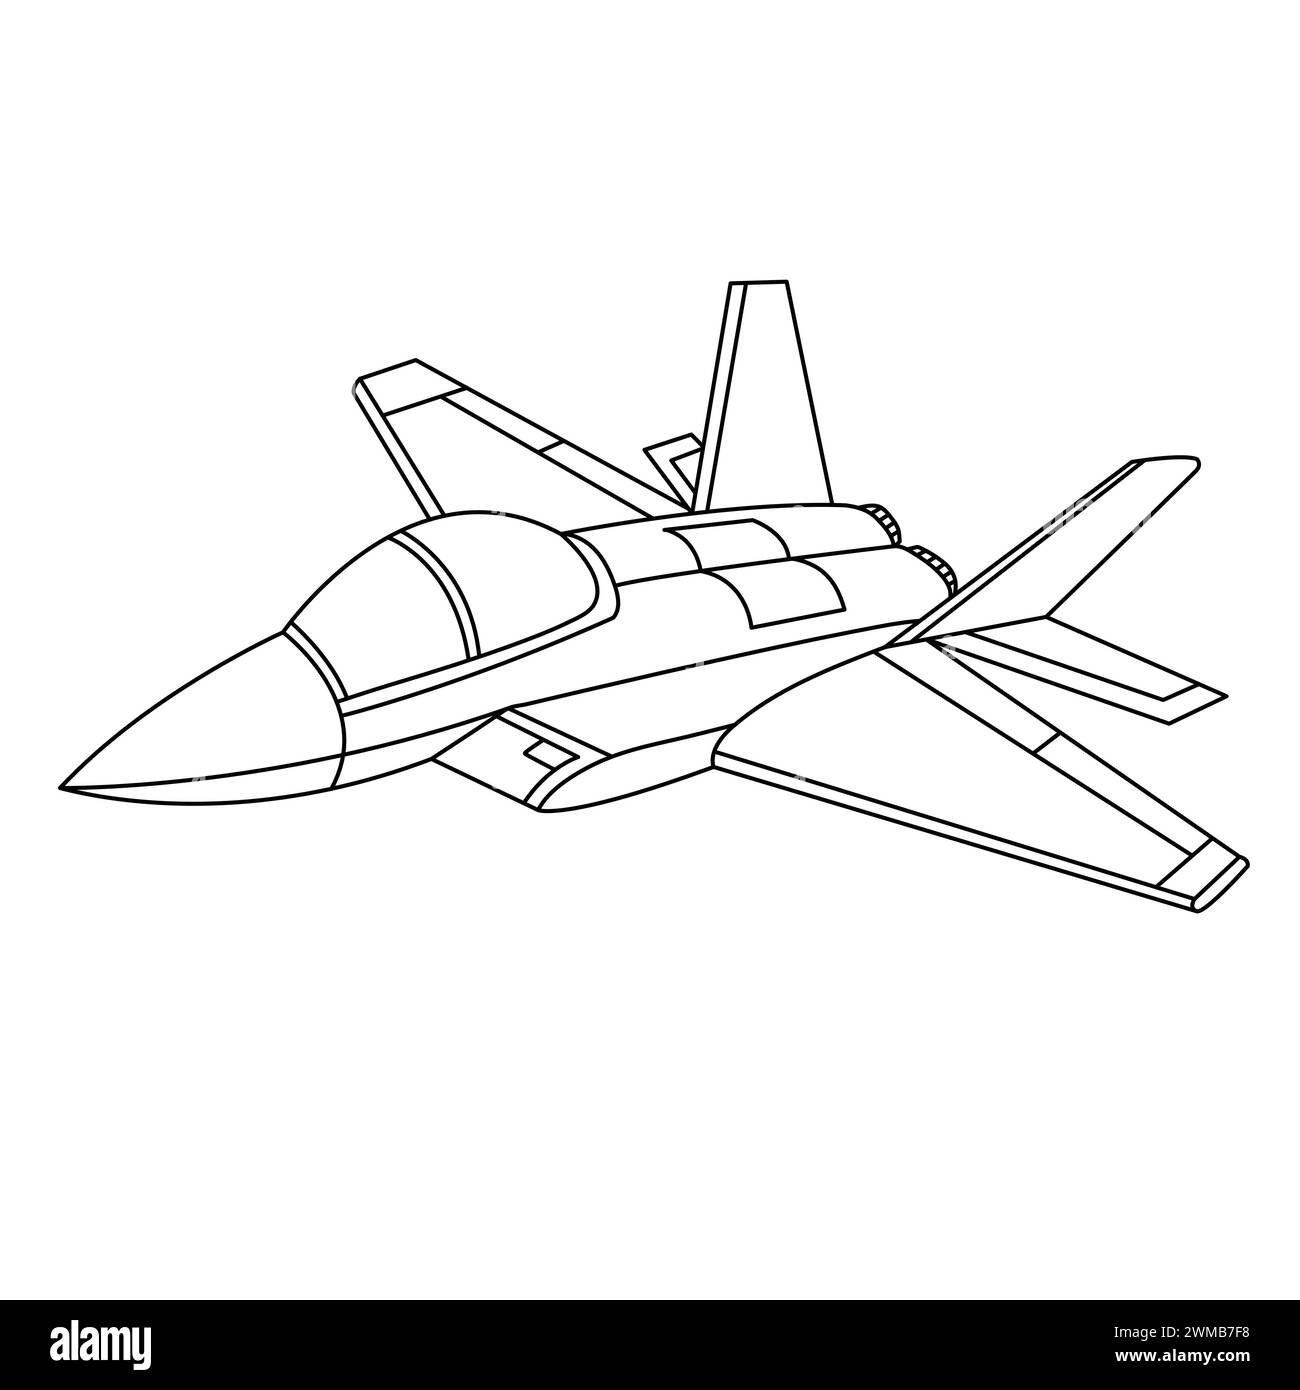 Aircraft Coloring Page. Cartoon Jet Fighter Outline Design. Military Airplane Isolated on White Background Stock Vector